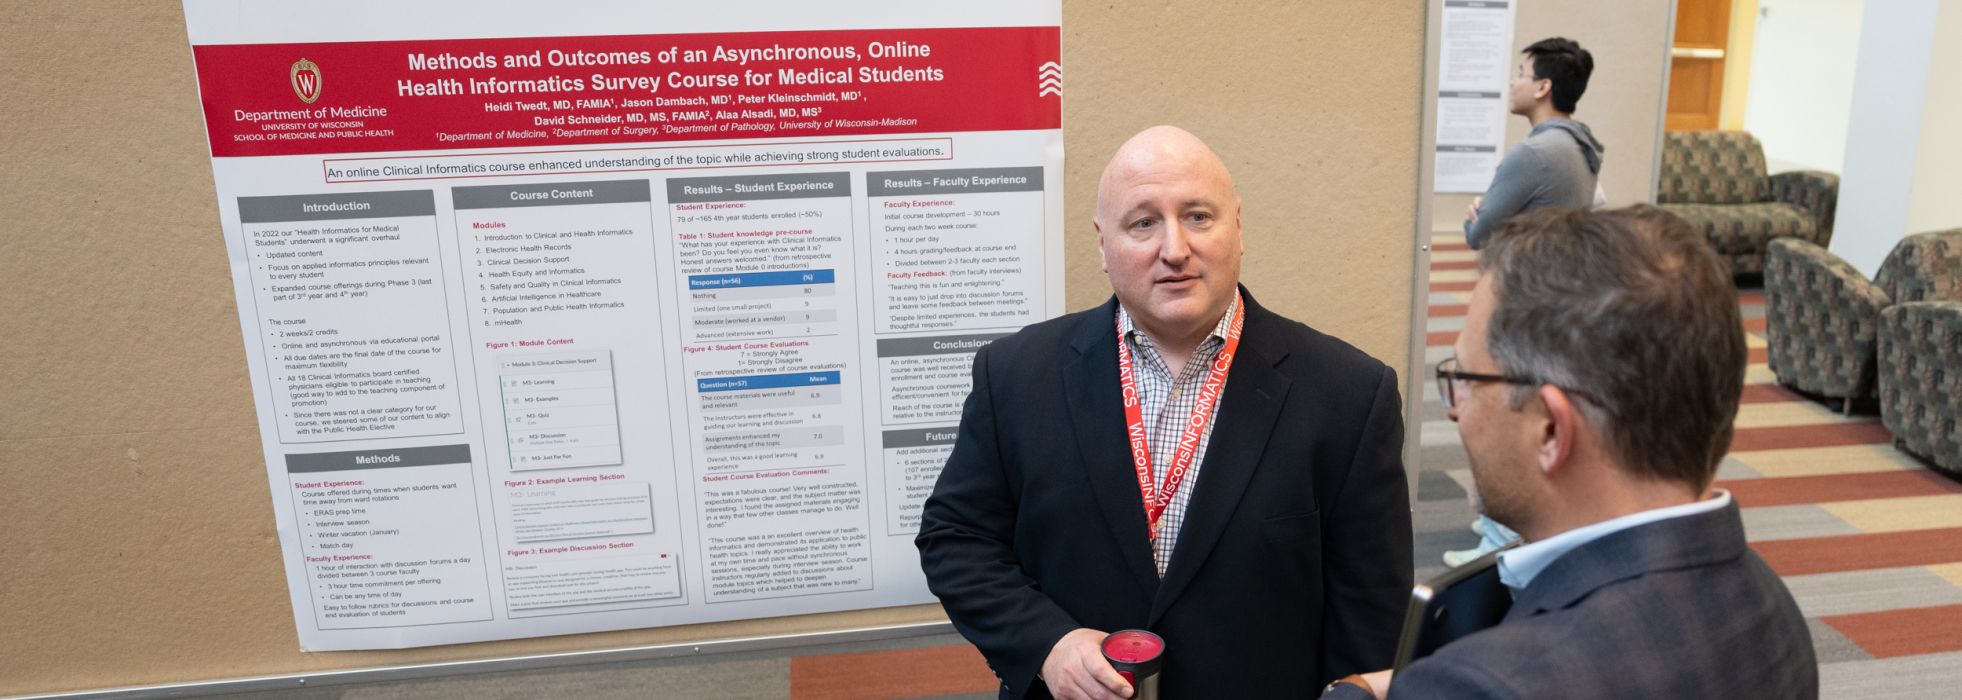 Dr. Jason Dambach discusses a poster on a health informatics course for medical students